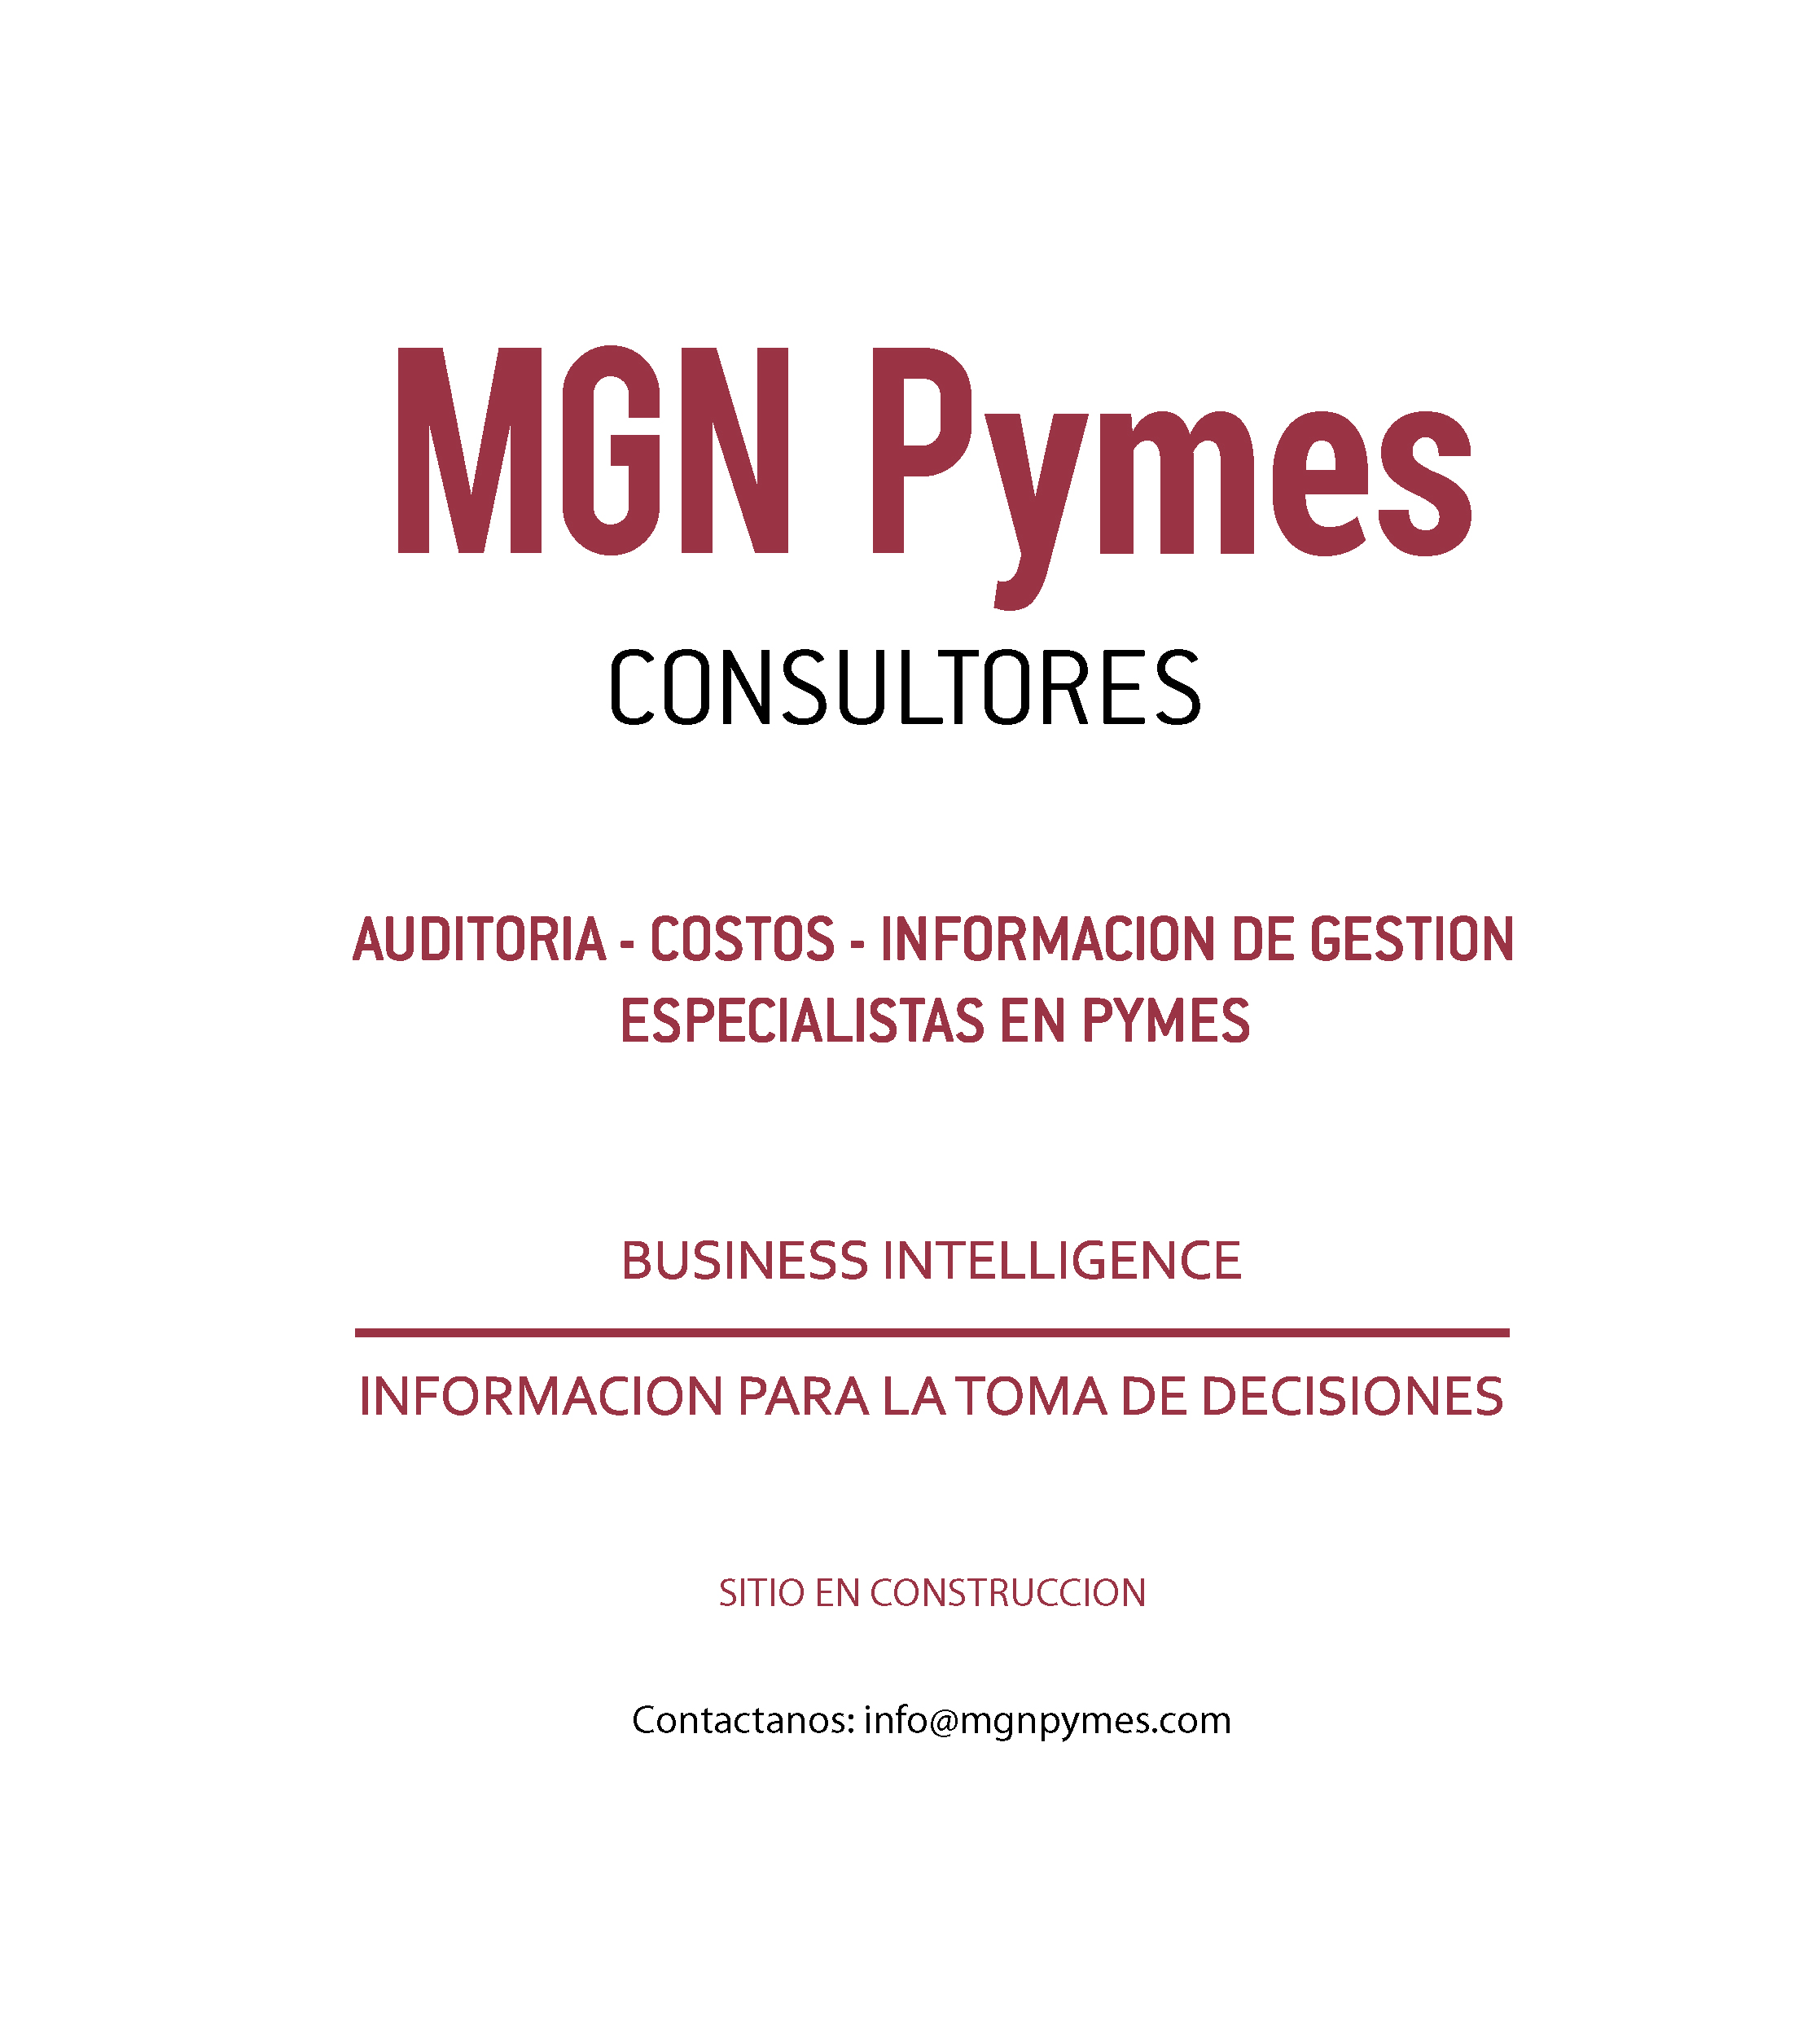 mgn pymes consultores